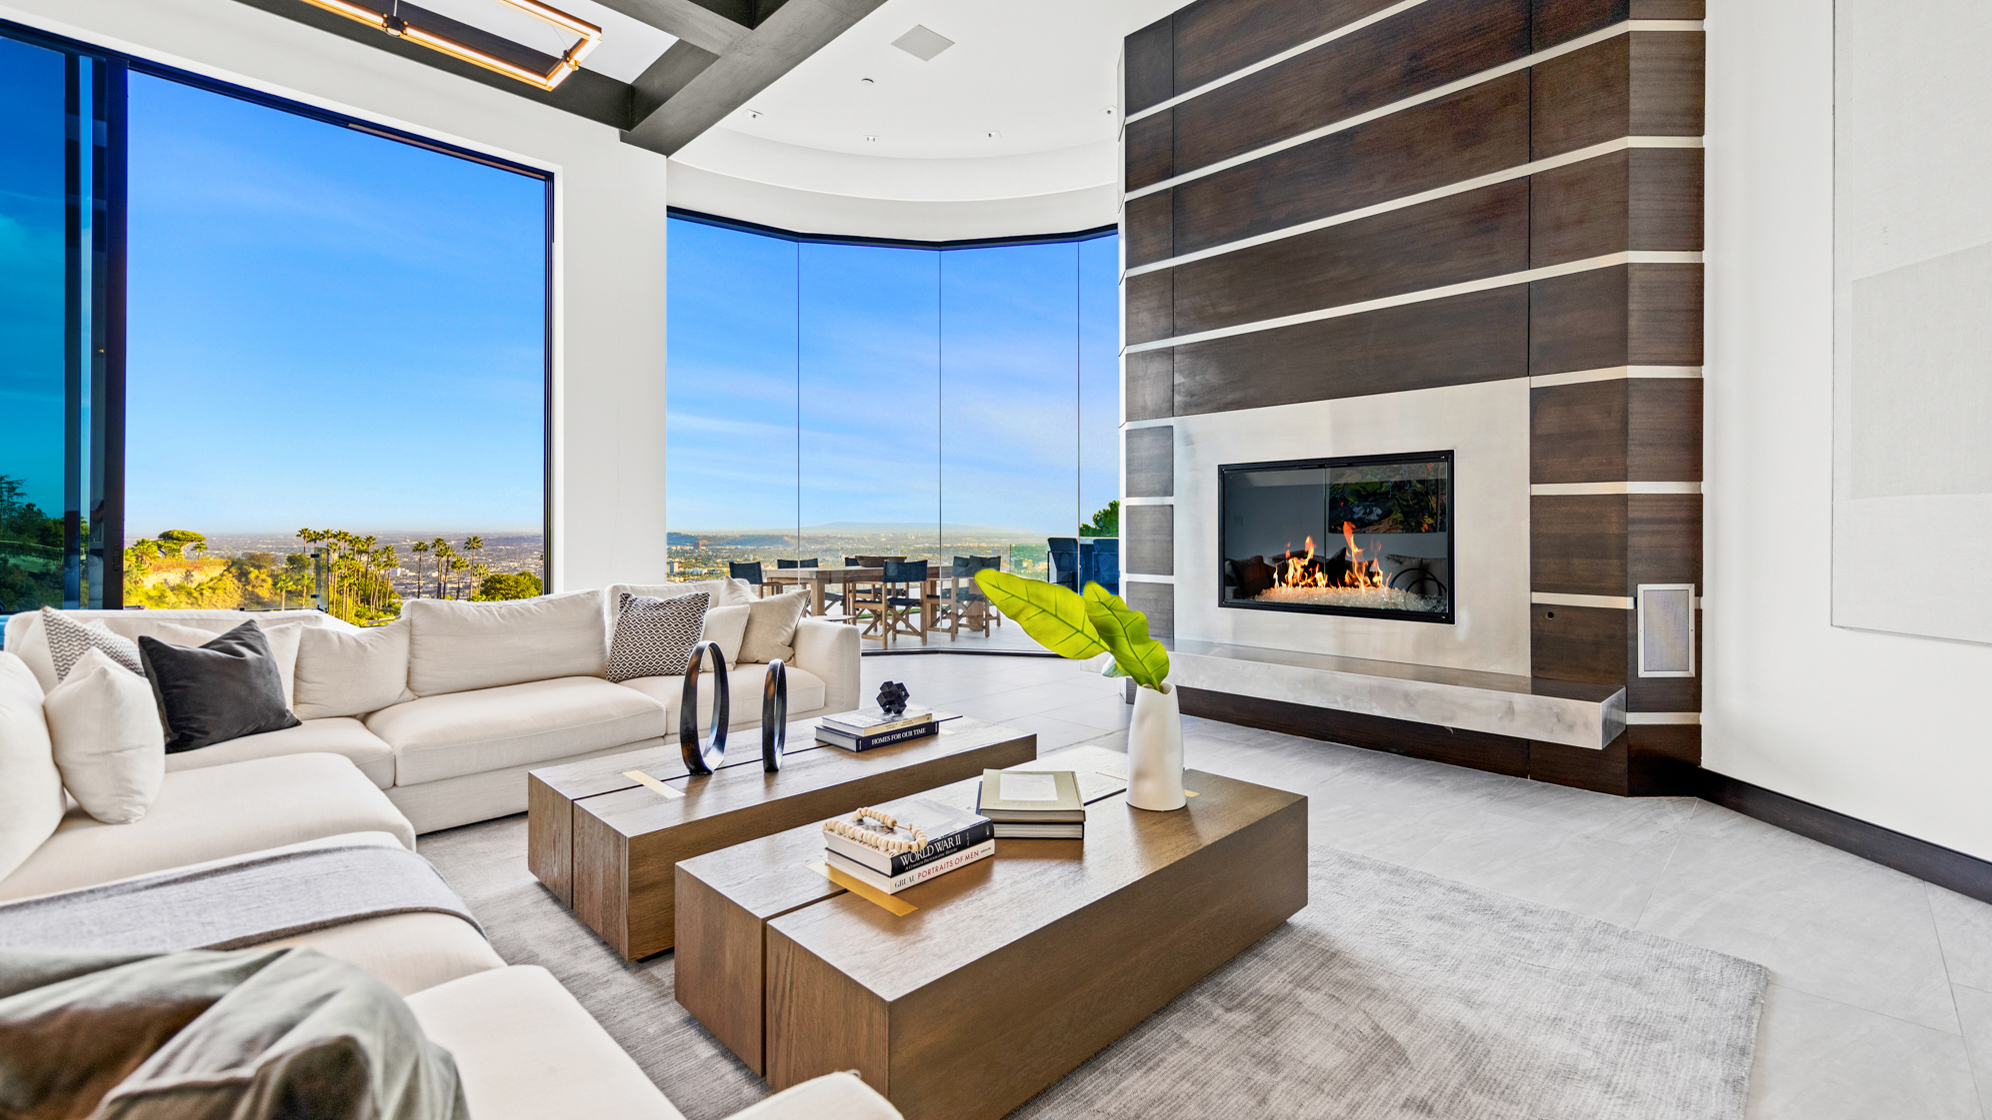 Sean 'Diddy' Combs' former LA home is listed for $14.5 million | Homes &  Gardens